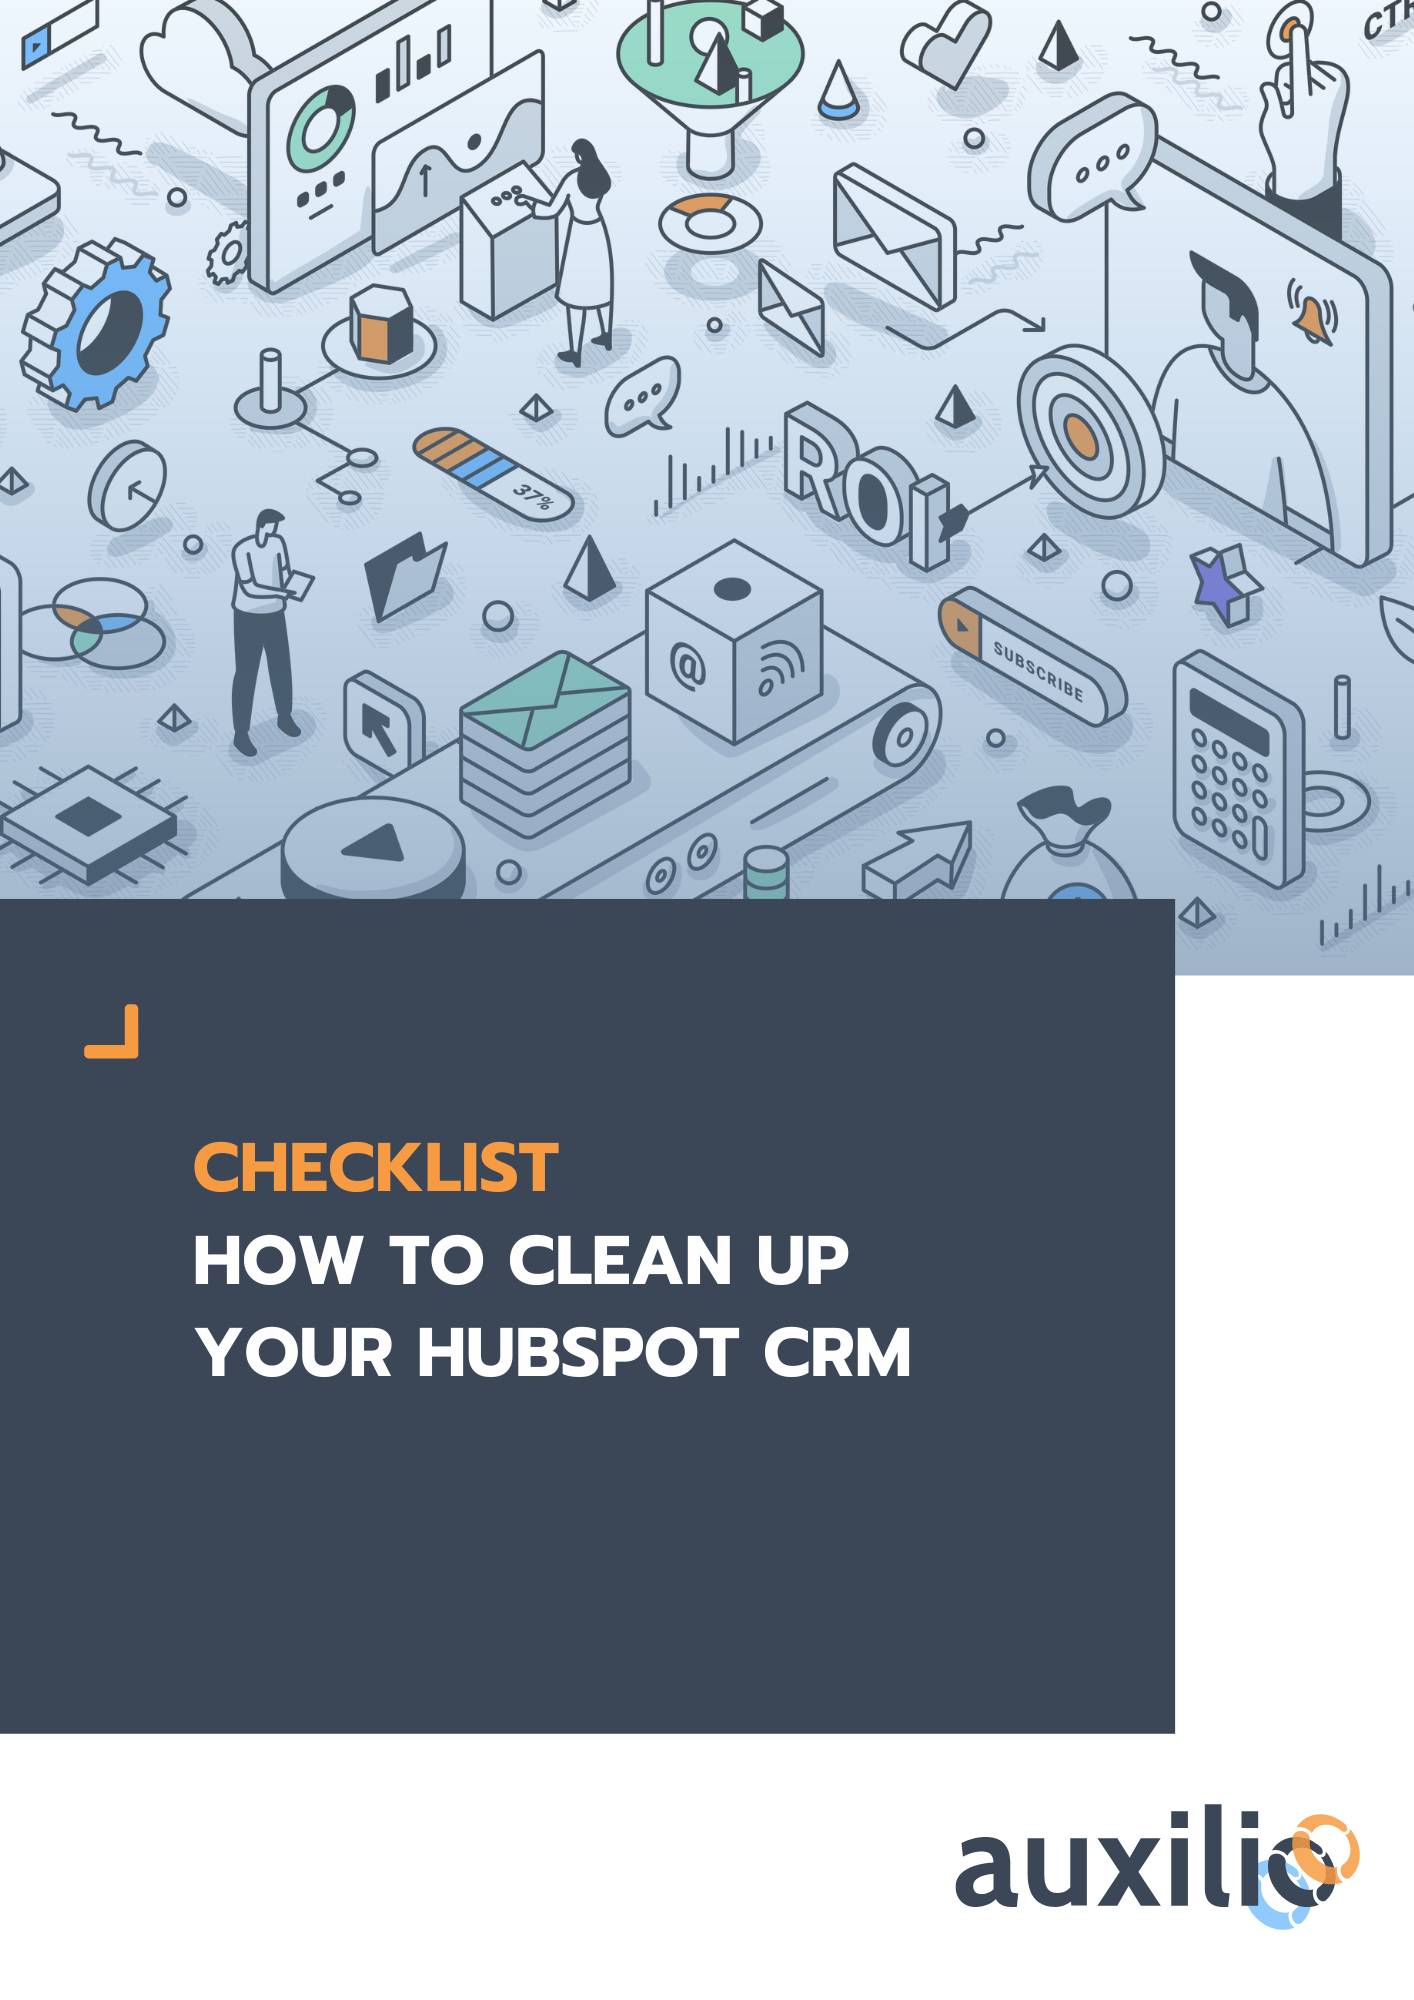 checklist-how-to-clean-up-your-hubspot-crm-v